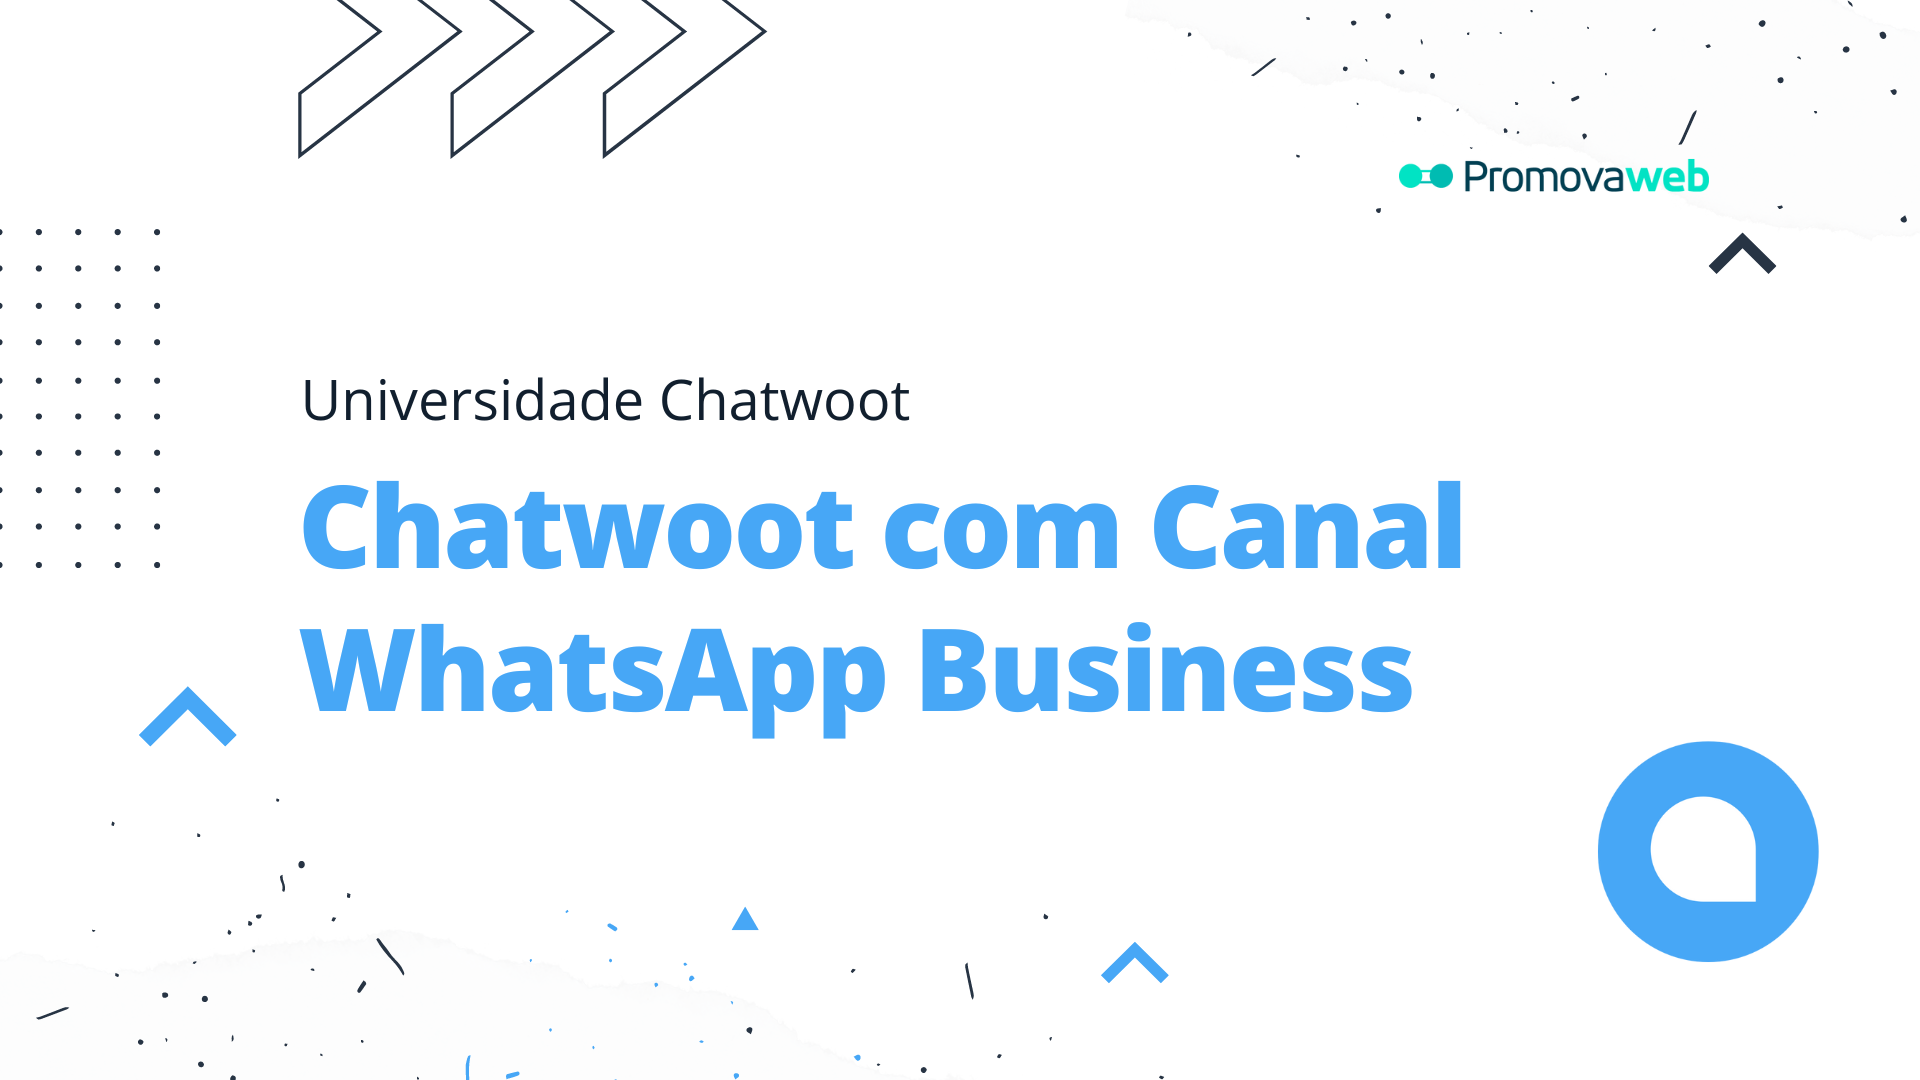 Chatwoot com Canal WhatsApp Business